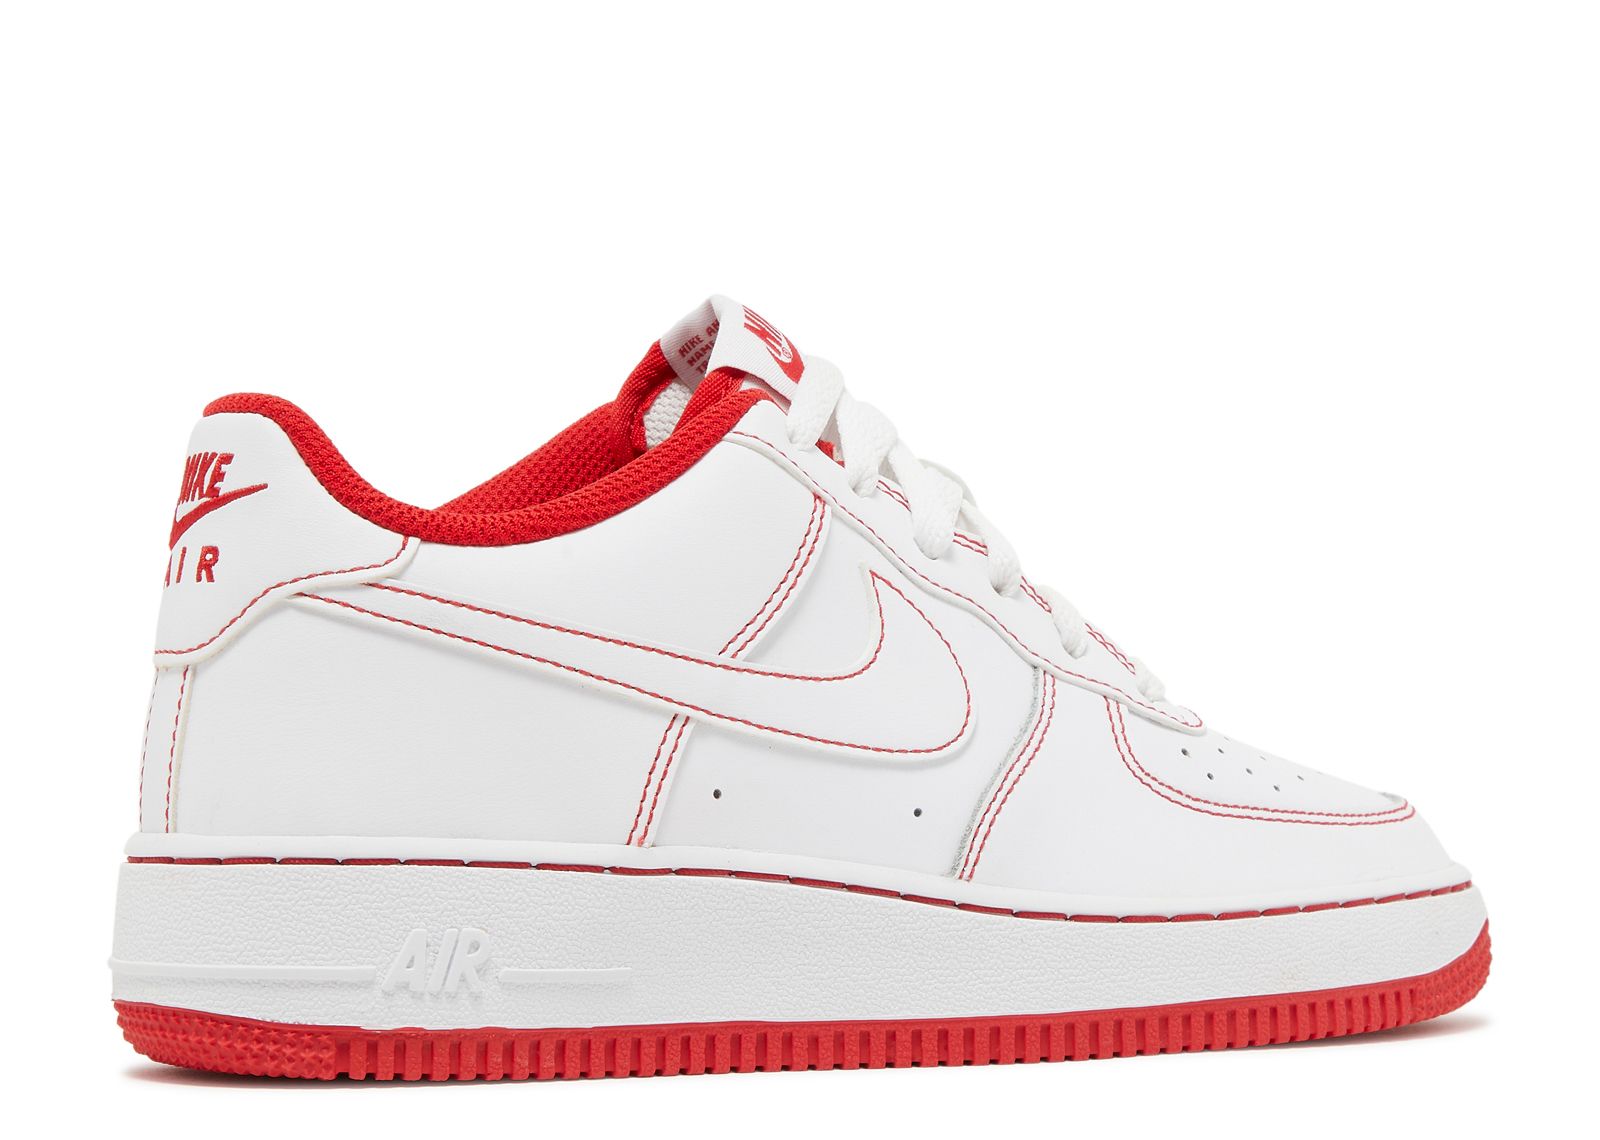 Buy Air Force 1 GS 'White University Red' - CD6915 101